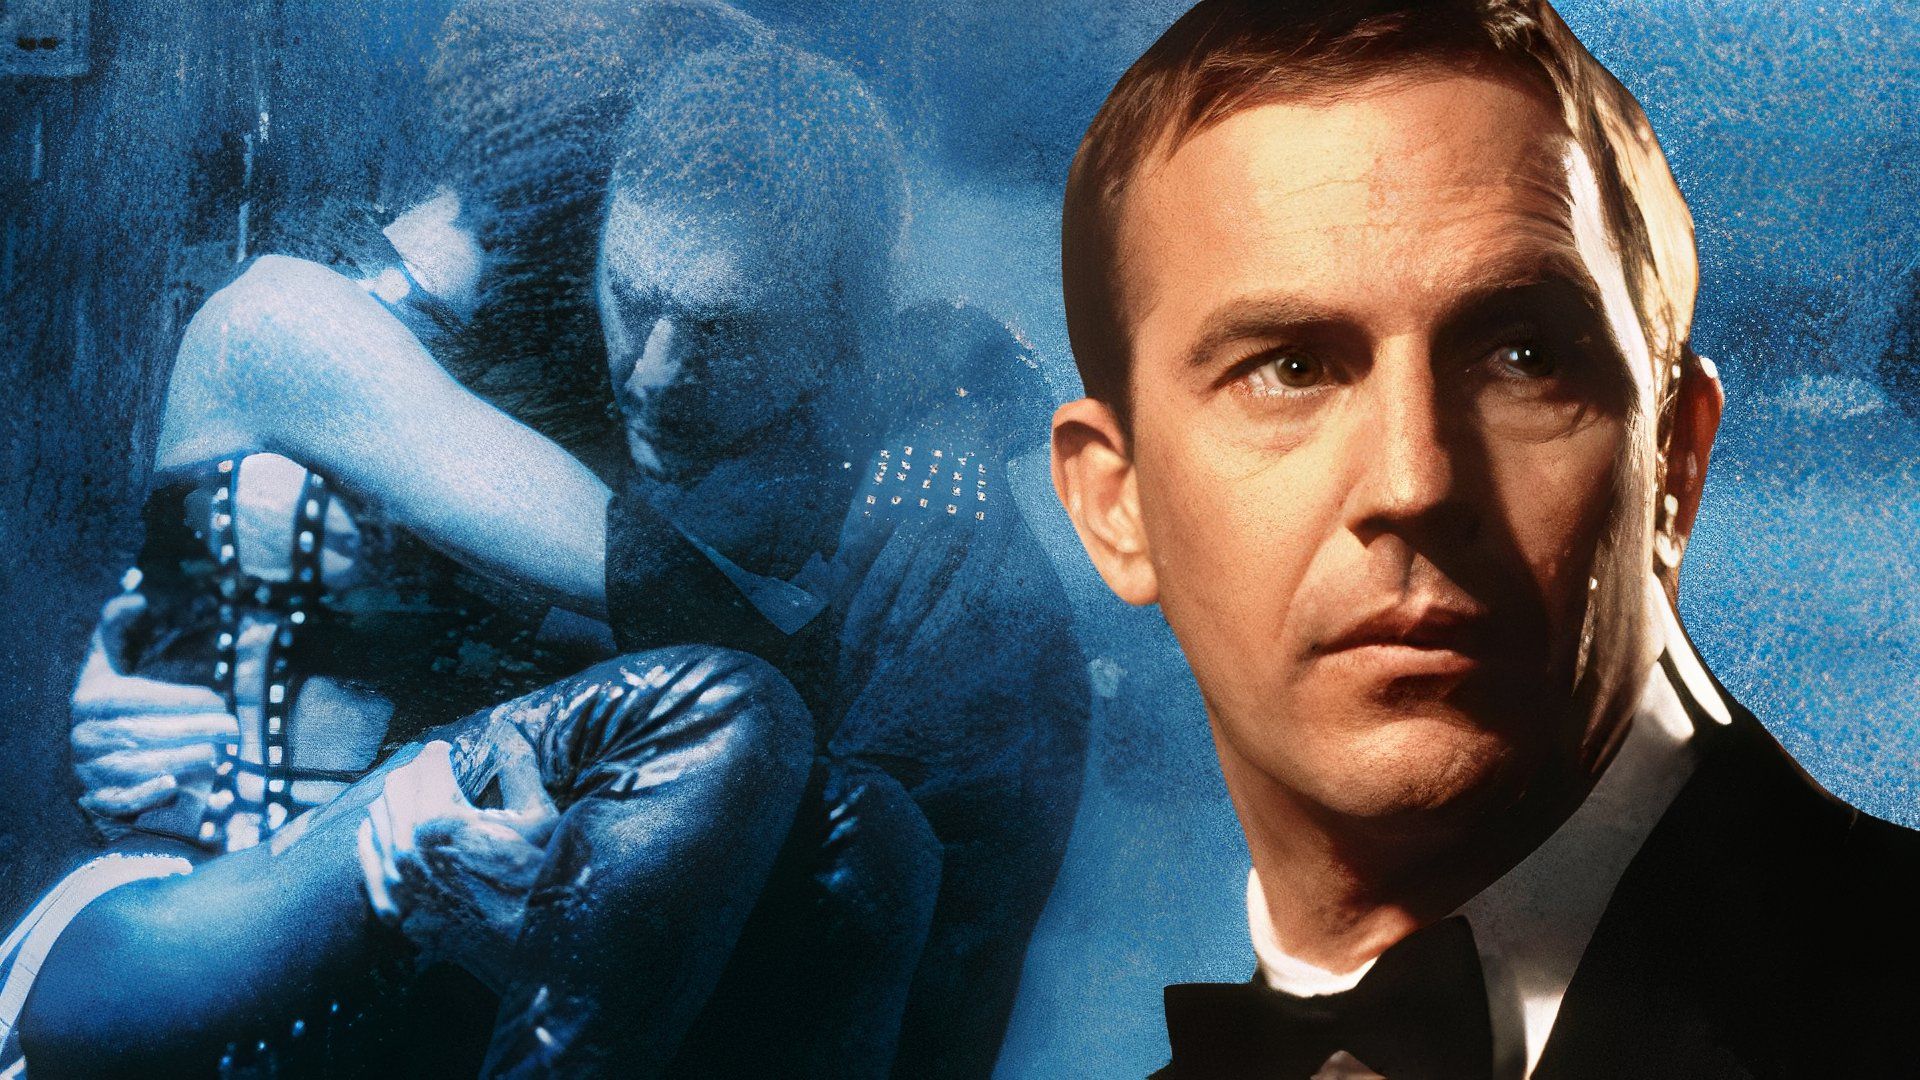 Kevin Costner Wanted to Make The Bodyguard Sequel With Real-Life Princess